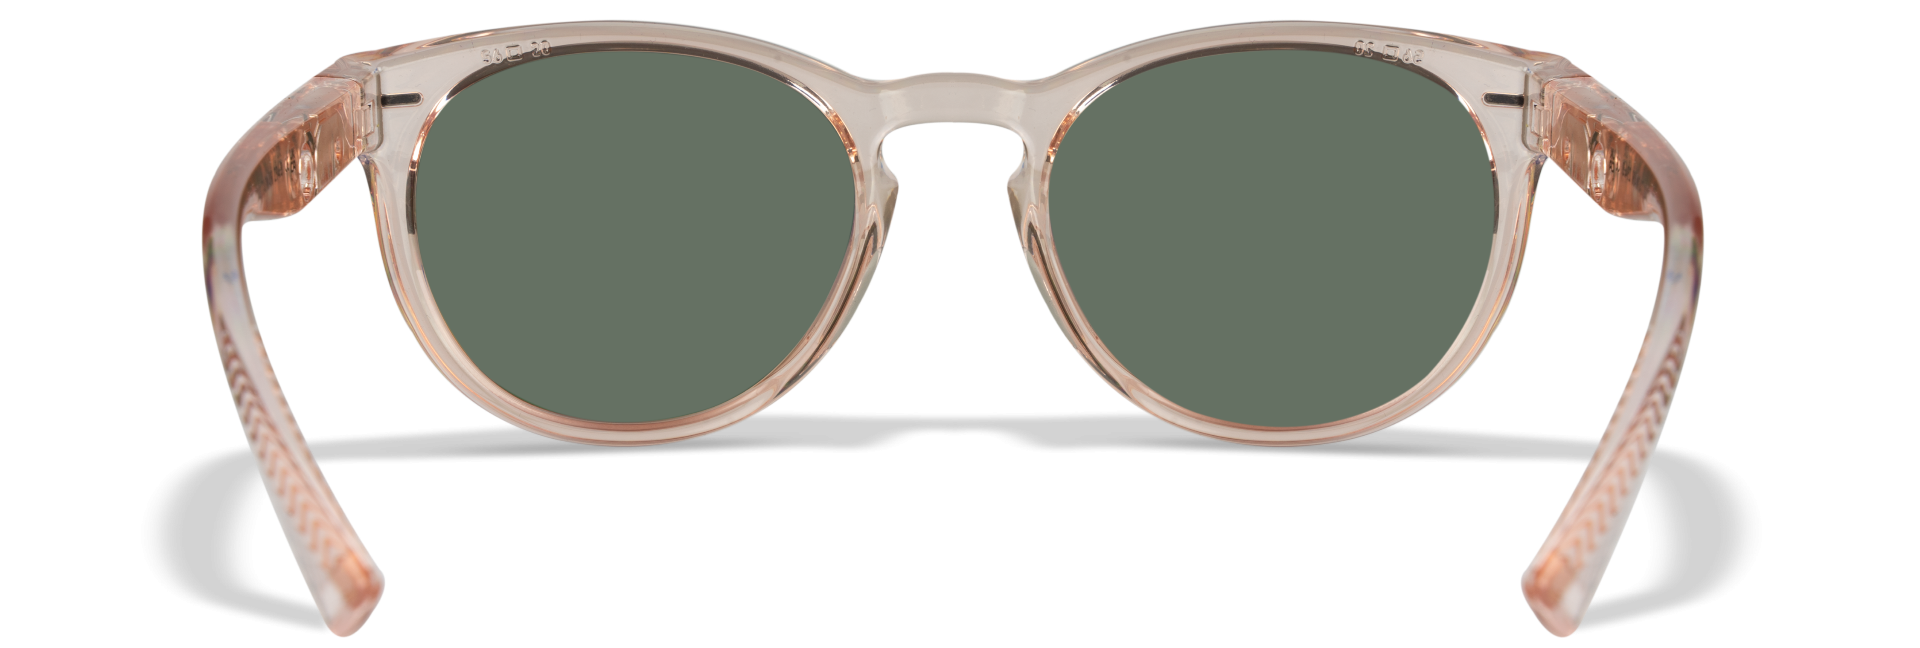 Wiley X – COVERT Captivate Polarized Rose Gold Mirror Smoke Green Gloss Crystal Blush Frame German / Italy / Netherlands / Czech / France / Poland / Portugal / Hungary / Lithuania / Slovakia